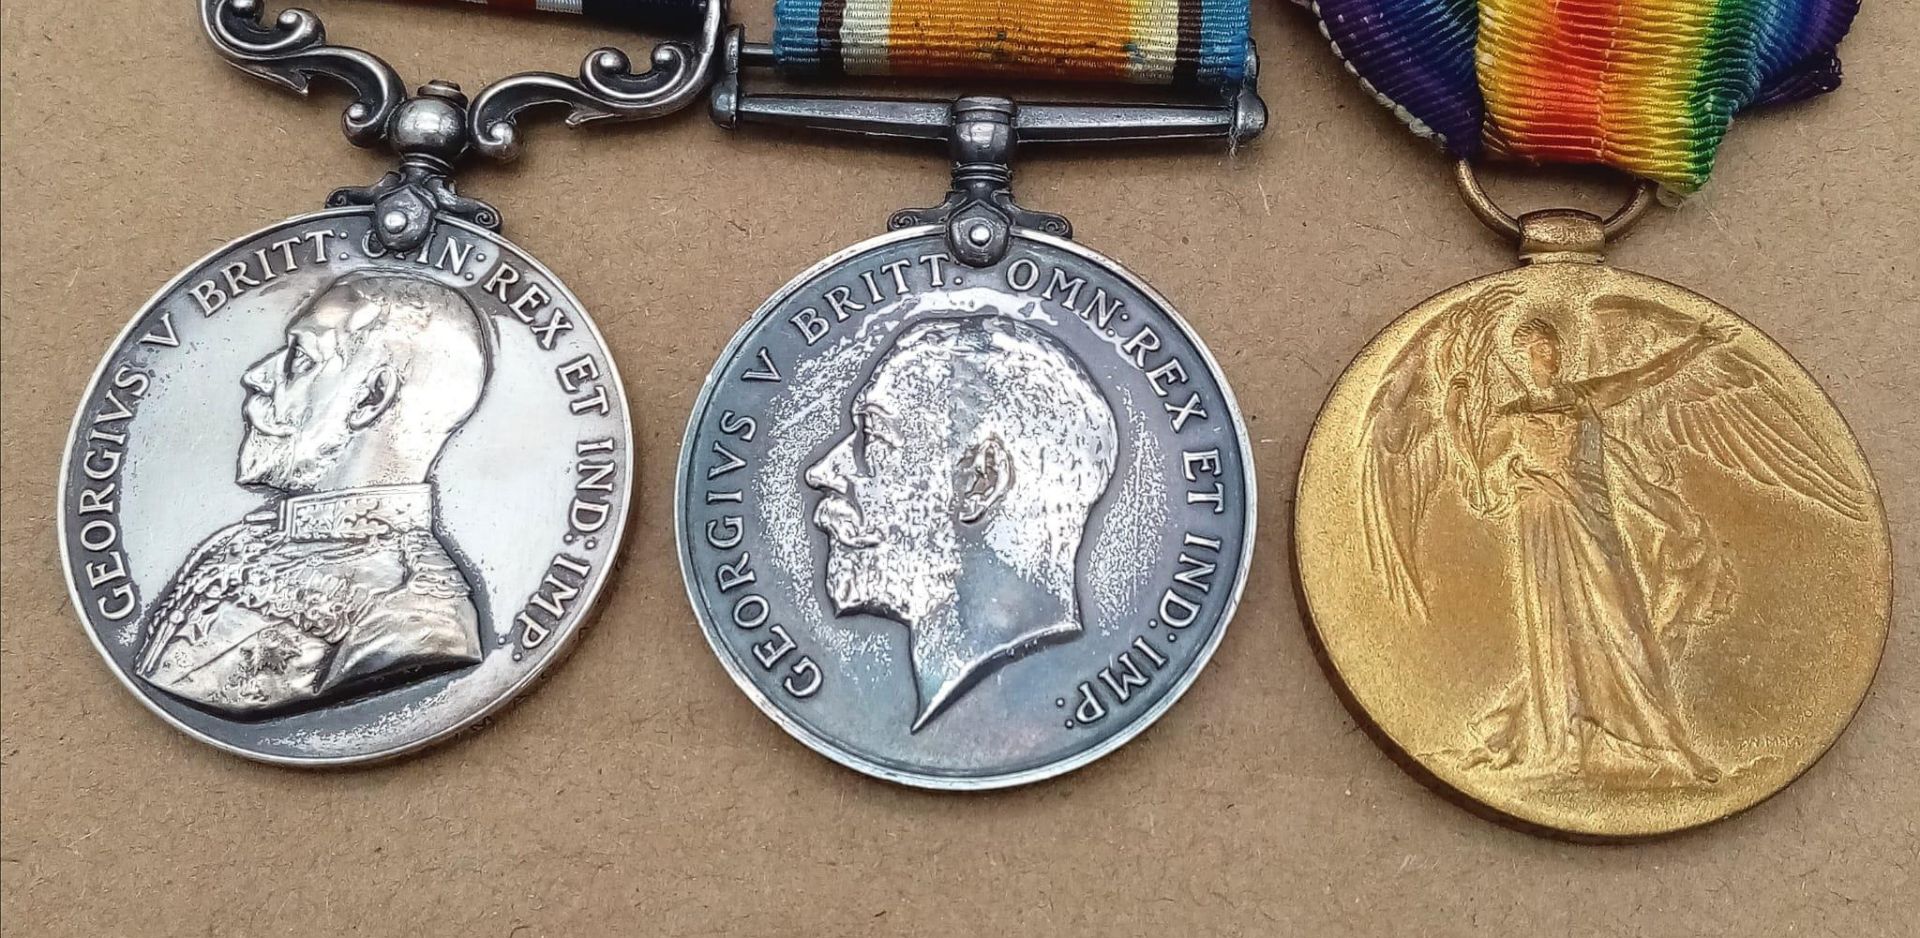 A WW1 Military Medal Group Awarded to DM2.207016 Pte Harry Glover 44 th Motor Ambulance Convoy - Image 2 of 6